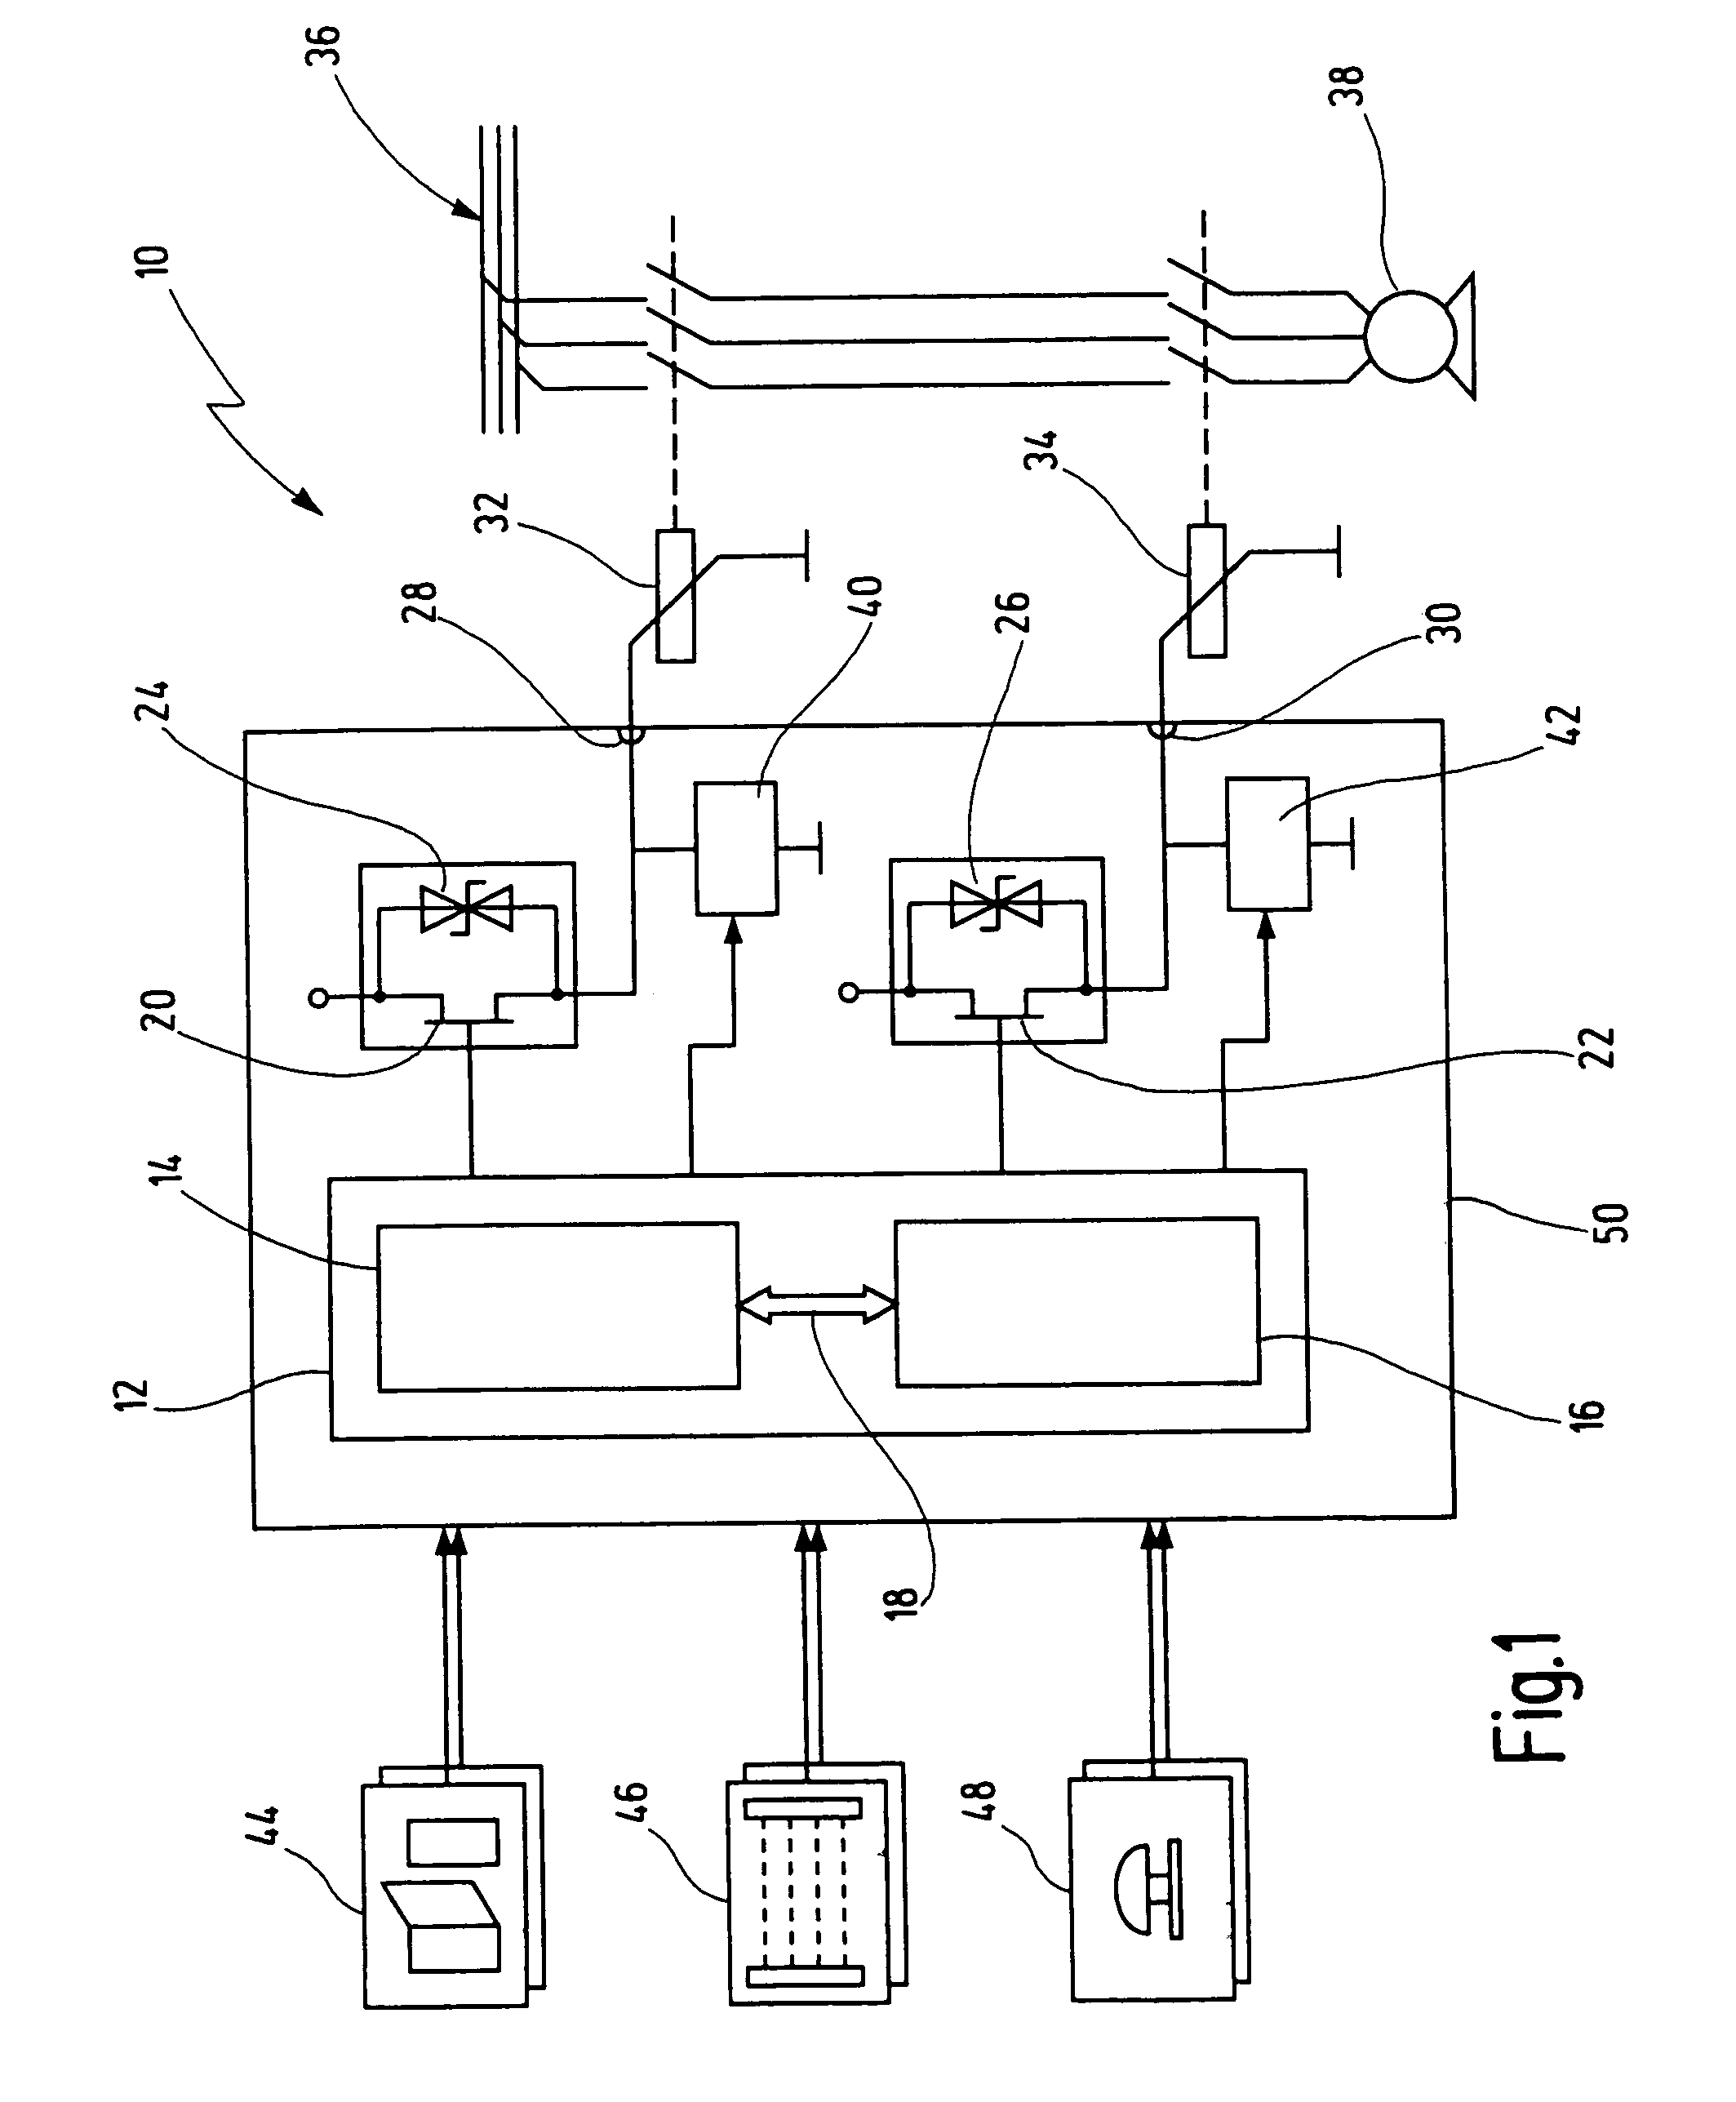 Safety switching device and method for failsafe shutdown of an electric load